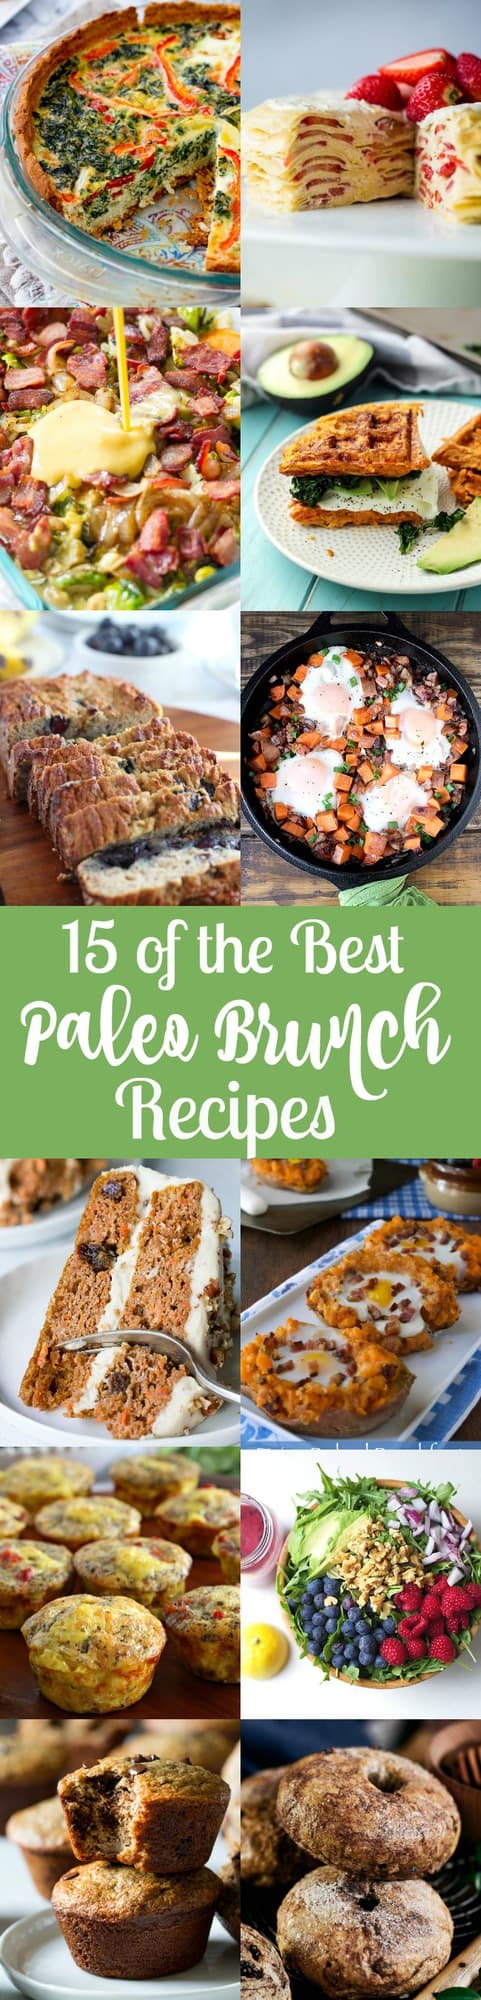 15 of the best Paleo brunch recipes all gluten free, dairy free, grain free and refined sugar free. Perfect for Mother's day, Easter and any gathering, there are some sweet, some savory, kid friendly and something for everyone!